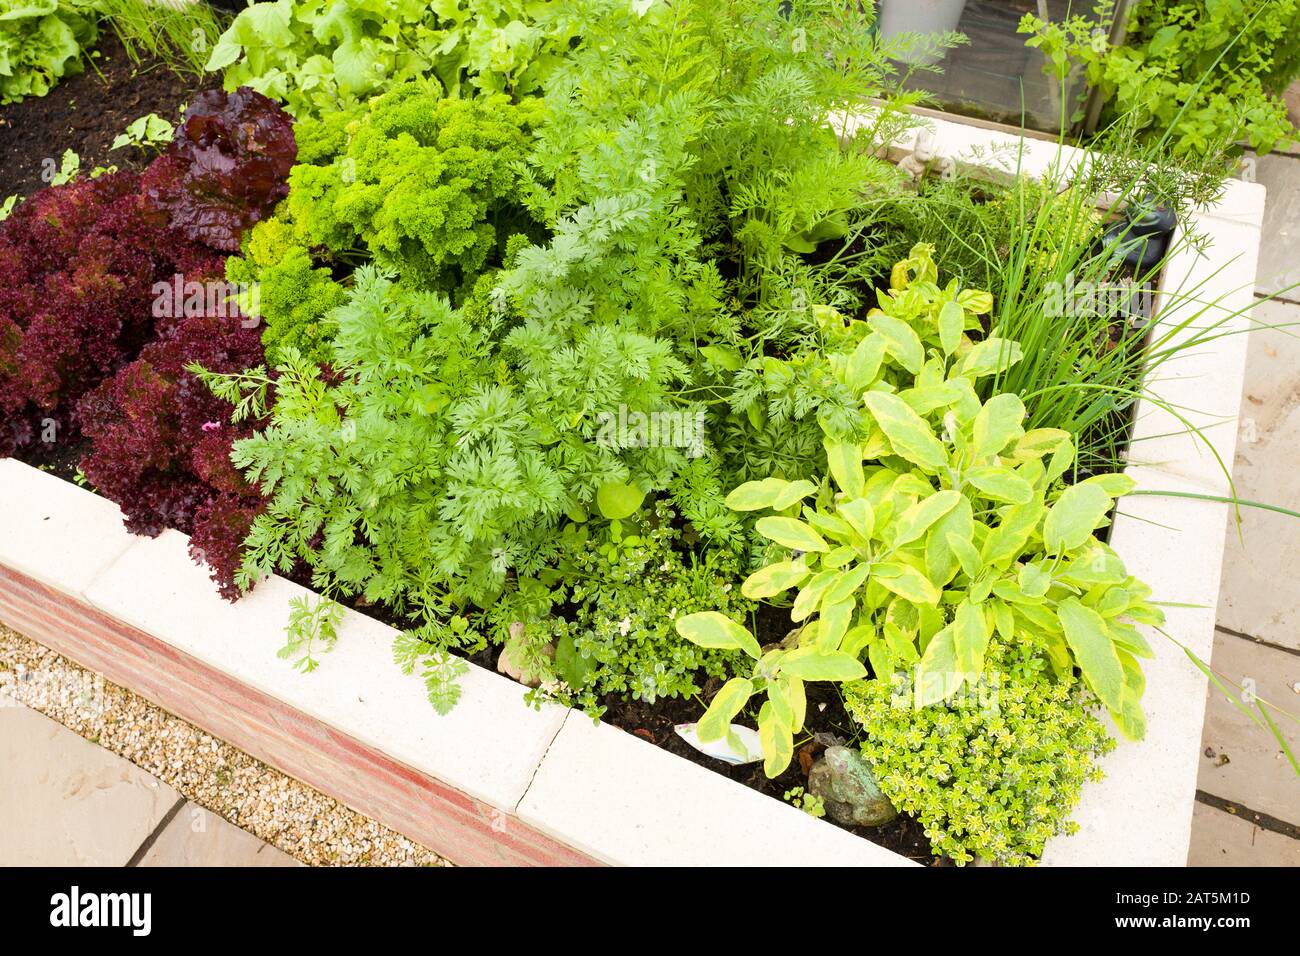 A selection of salad crops and herbs are growing in a new raised planter in an English garden Stock Photo